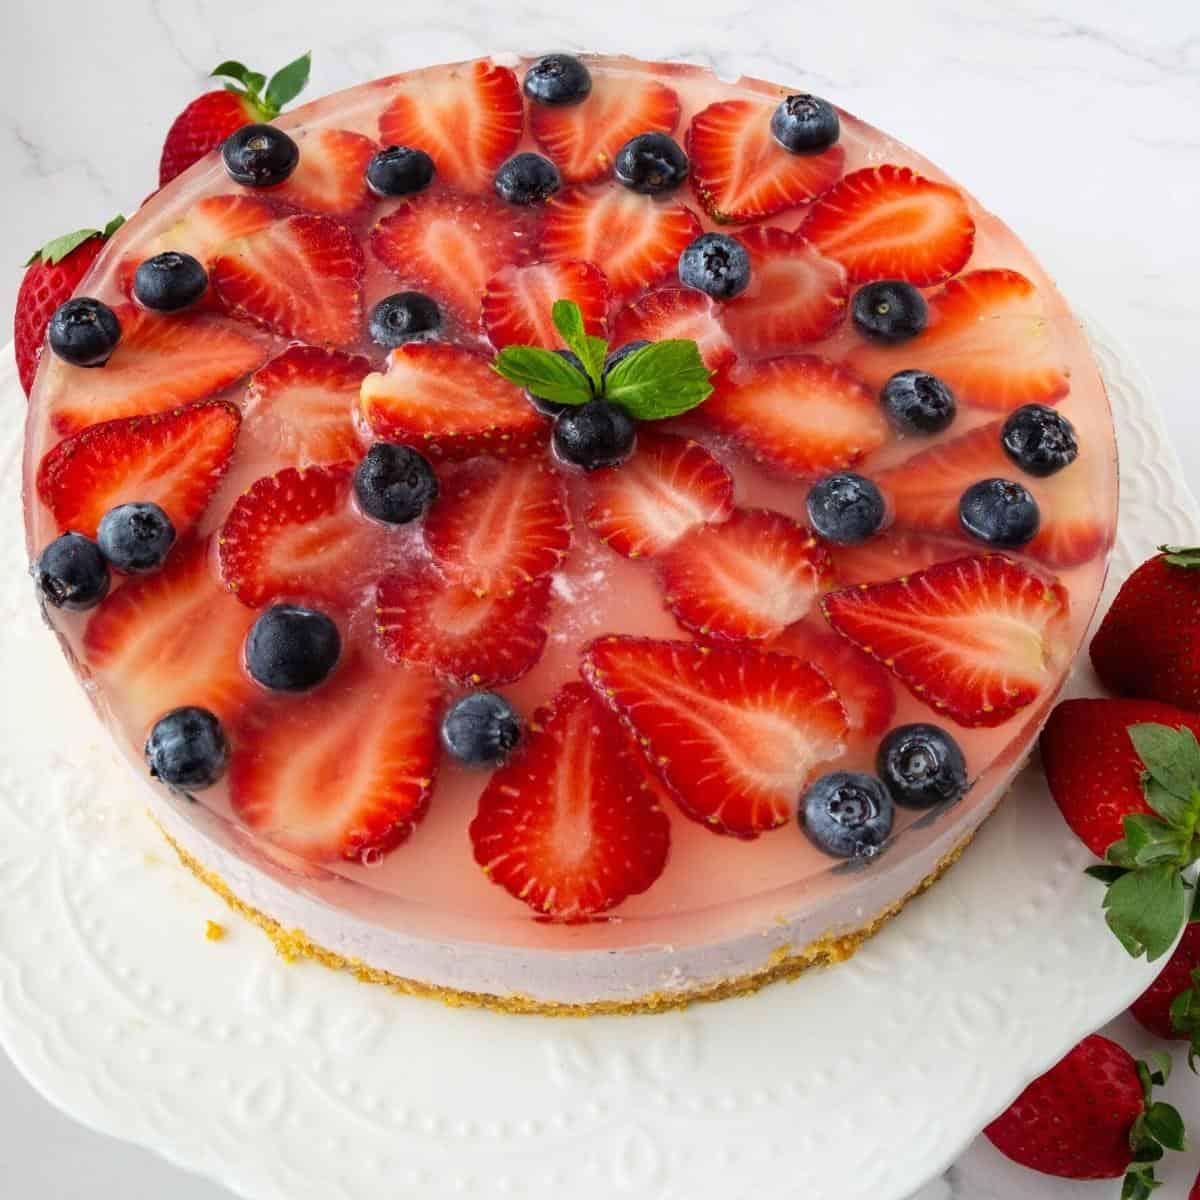 A mousse cake topped with jelly and fresh strawberries.